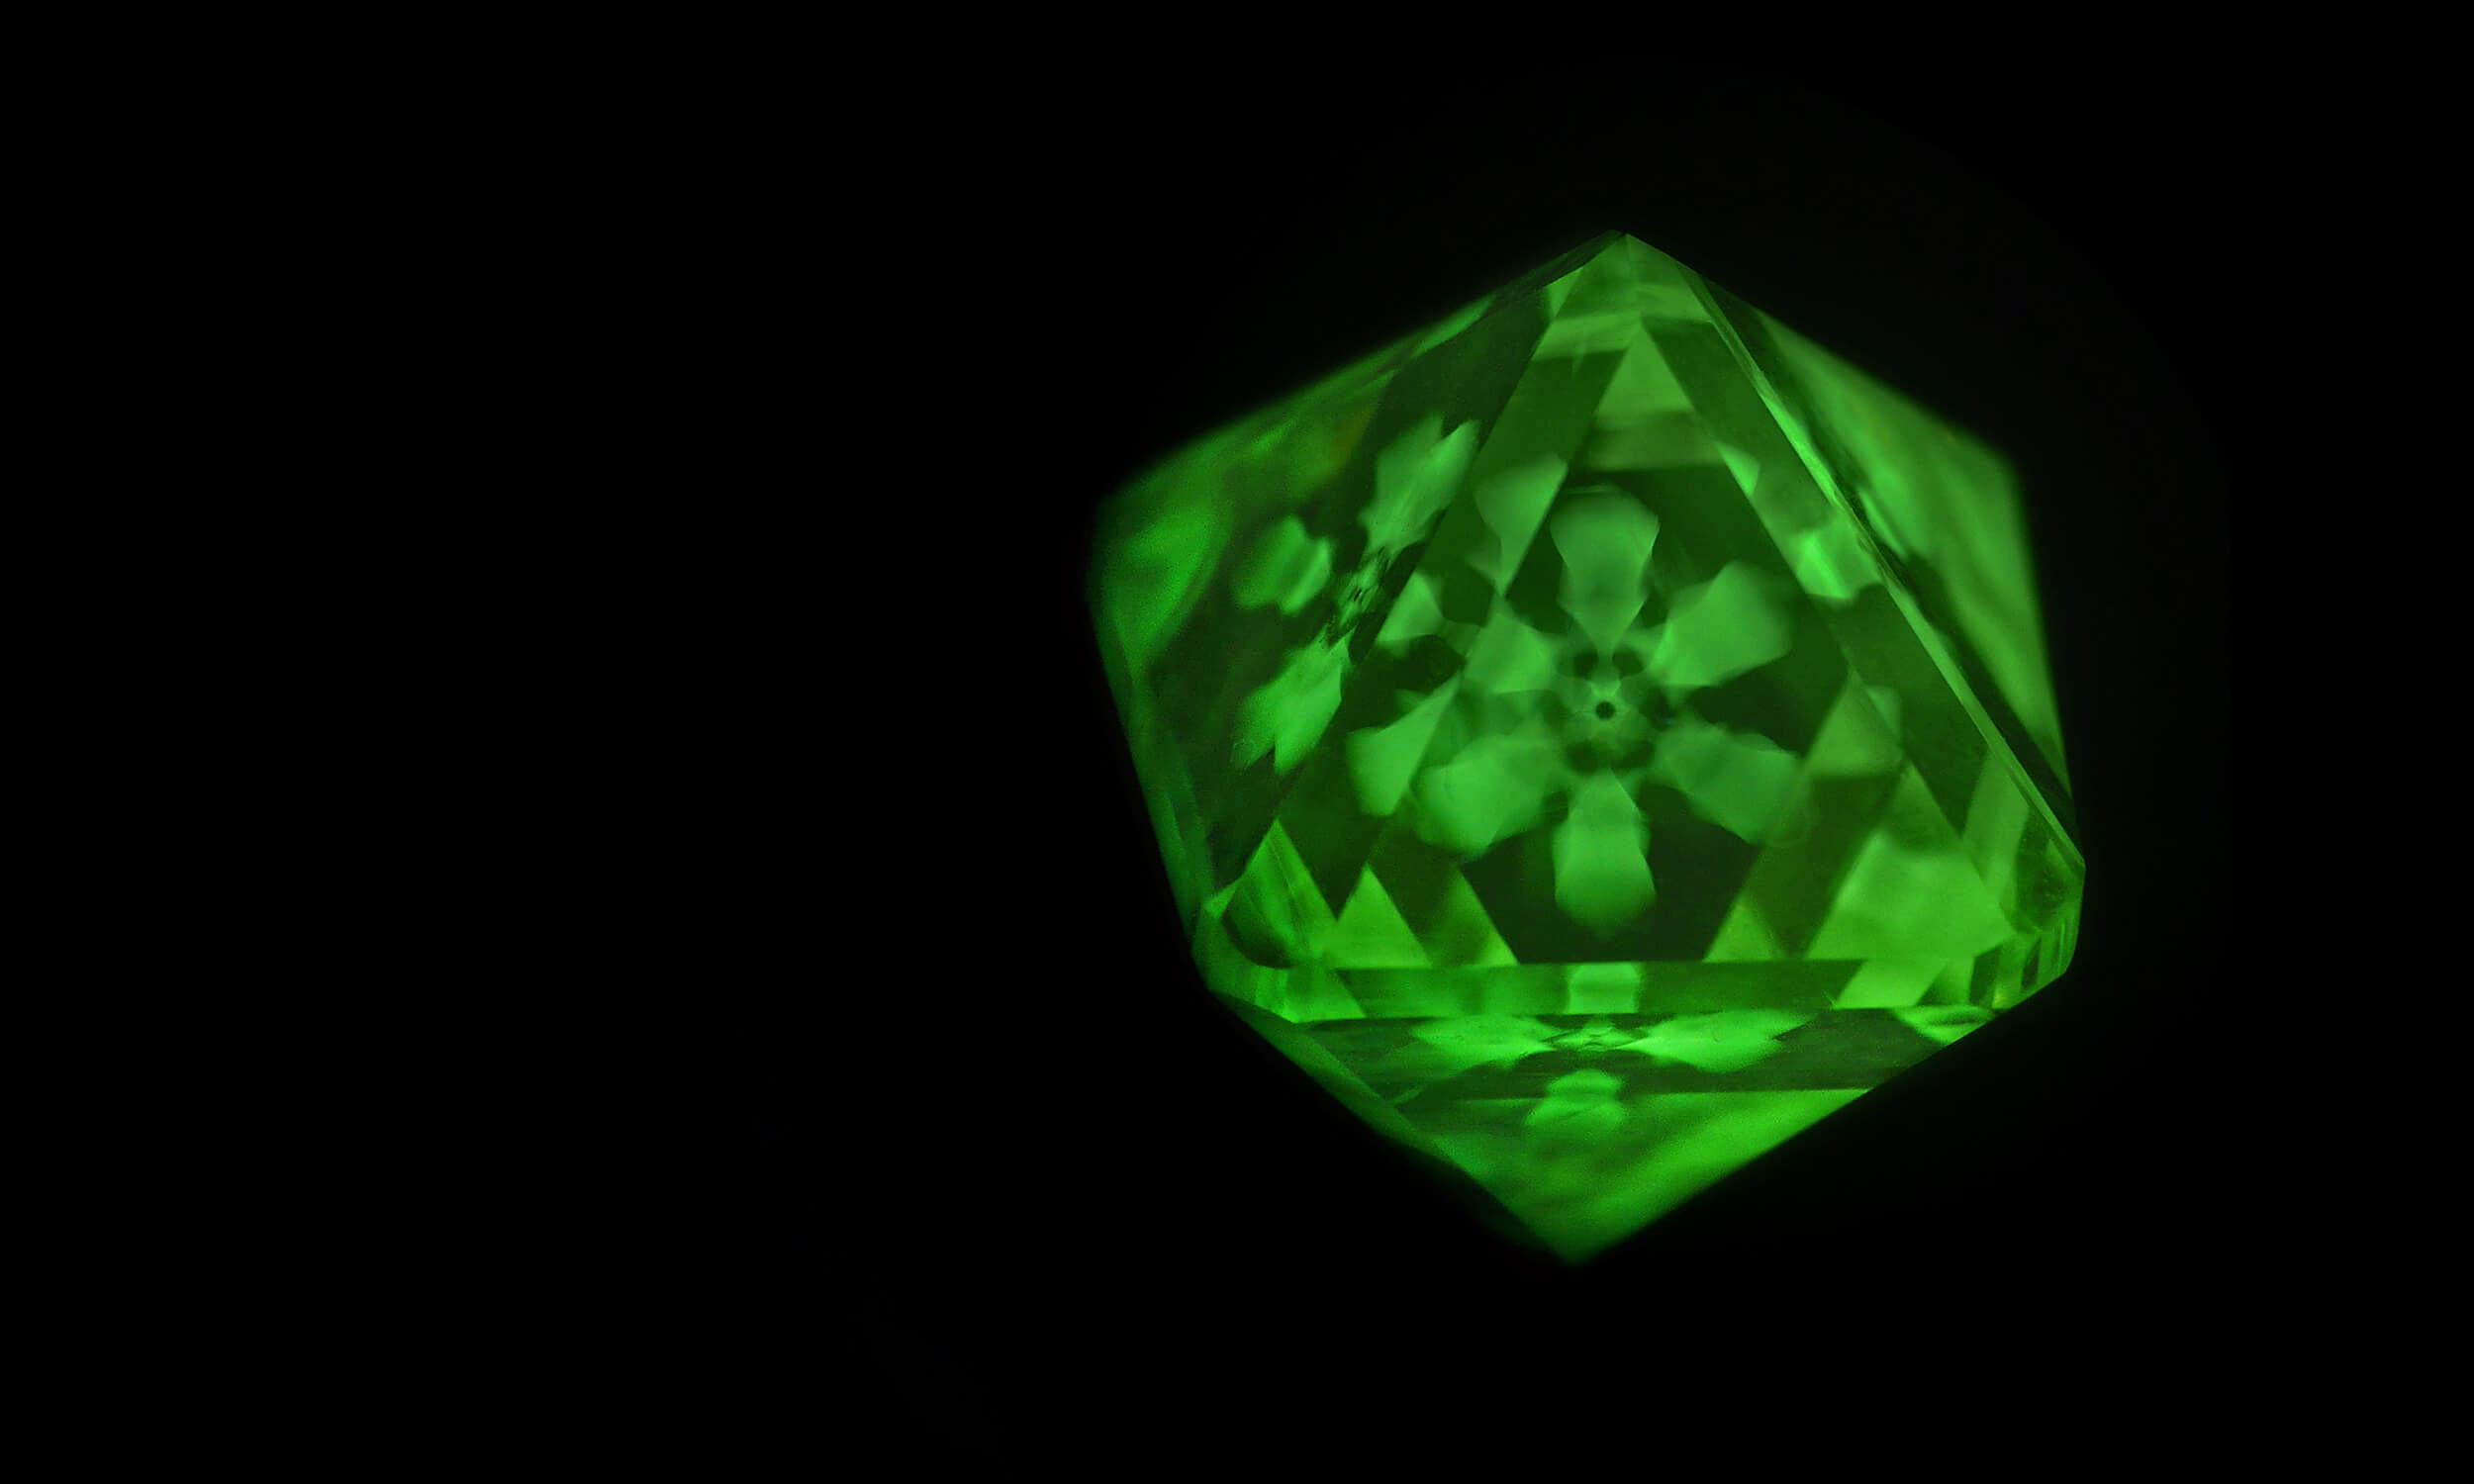 Asteriated luminescent structure in a rough diamond